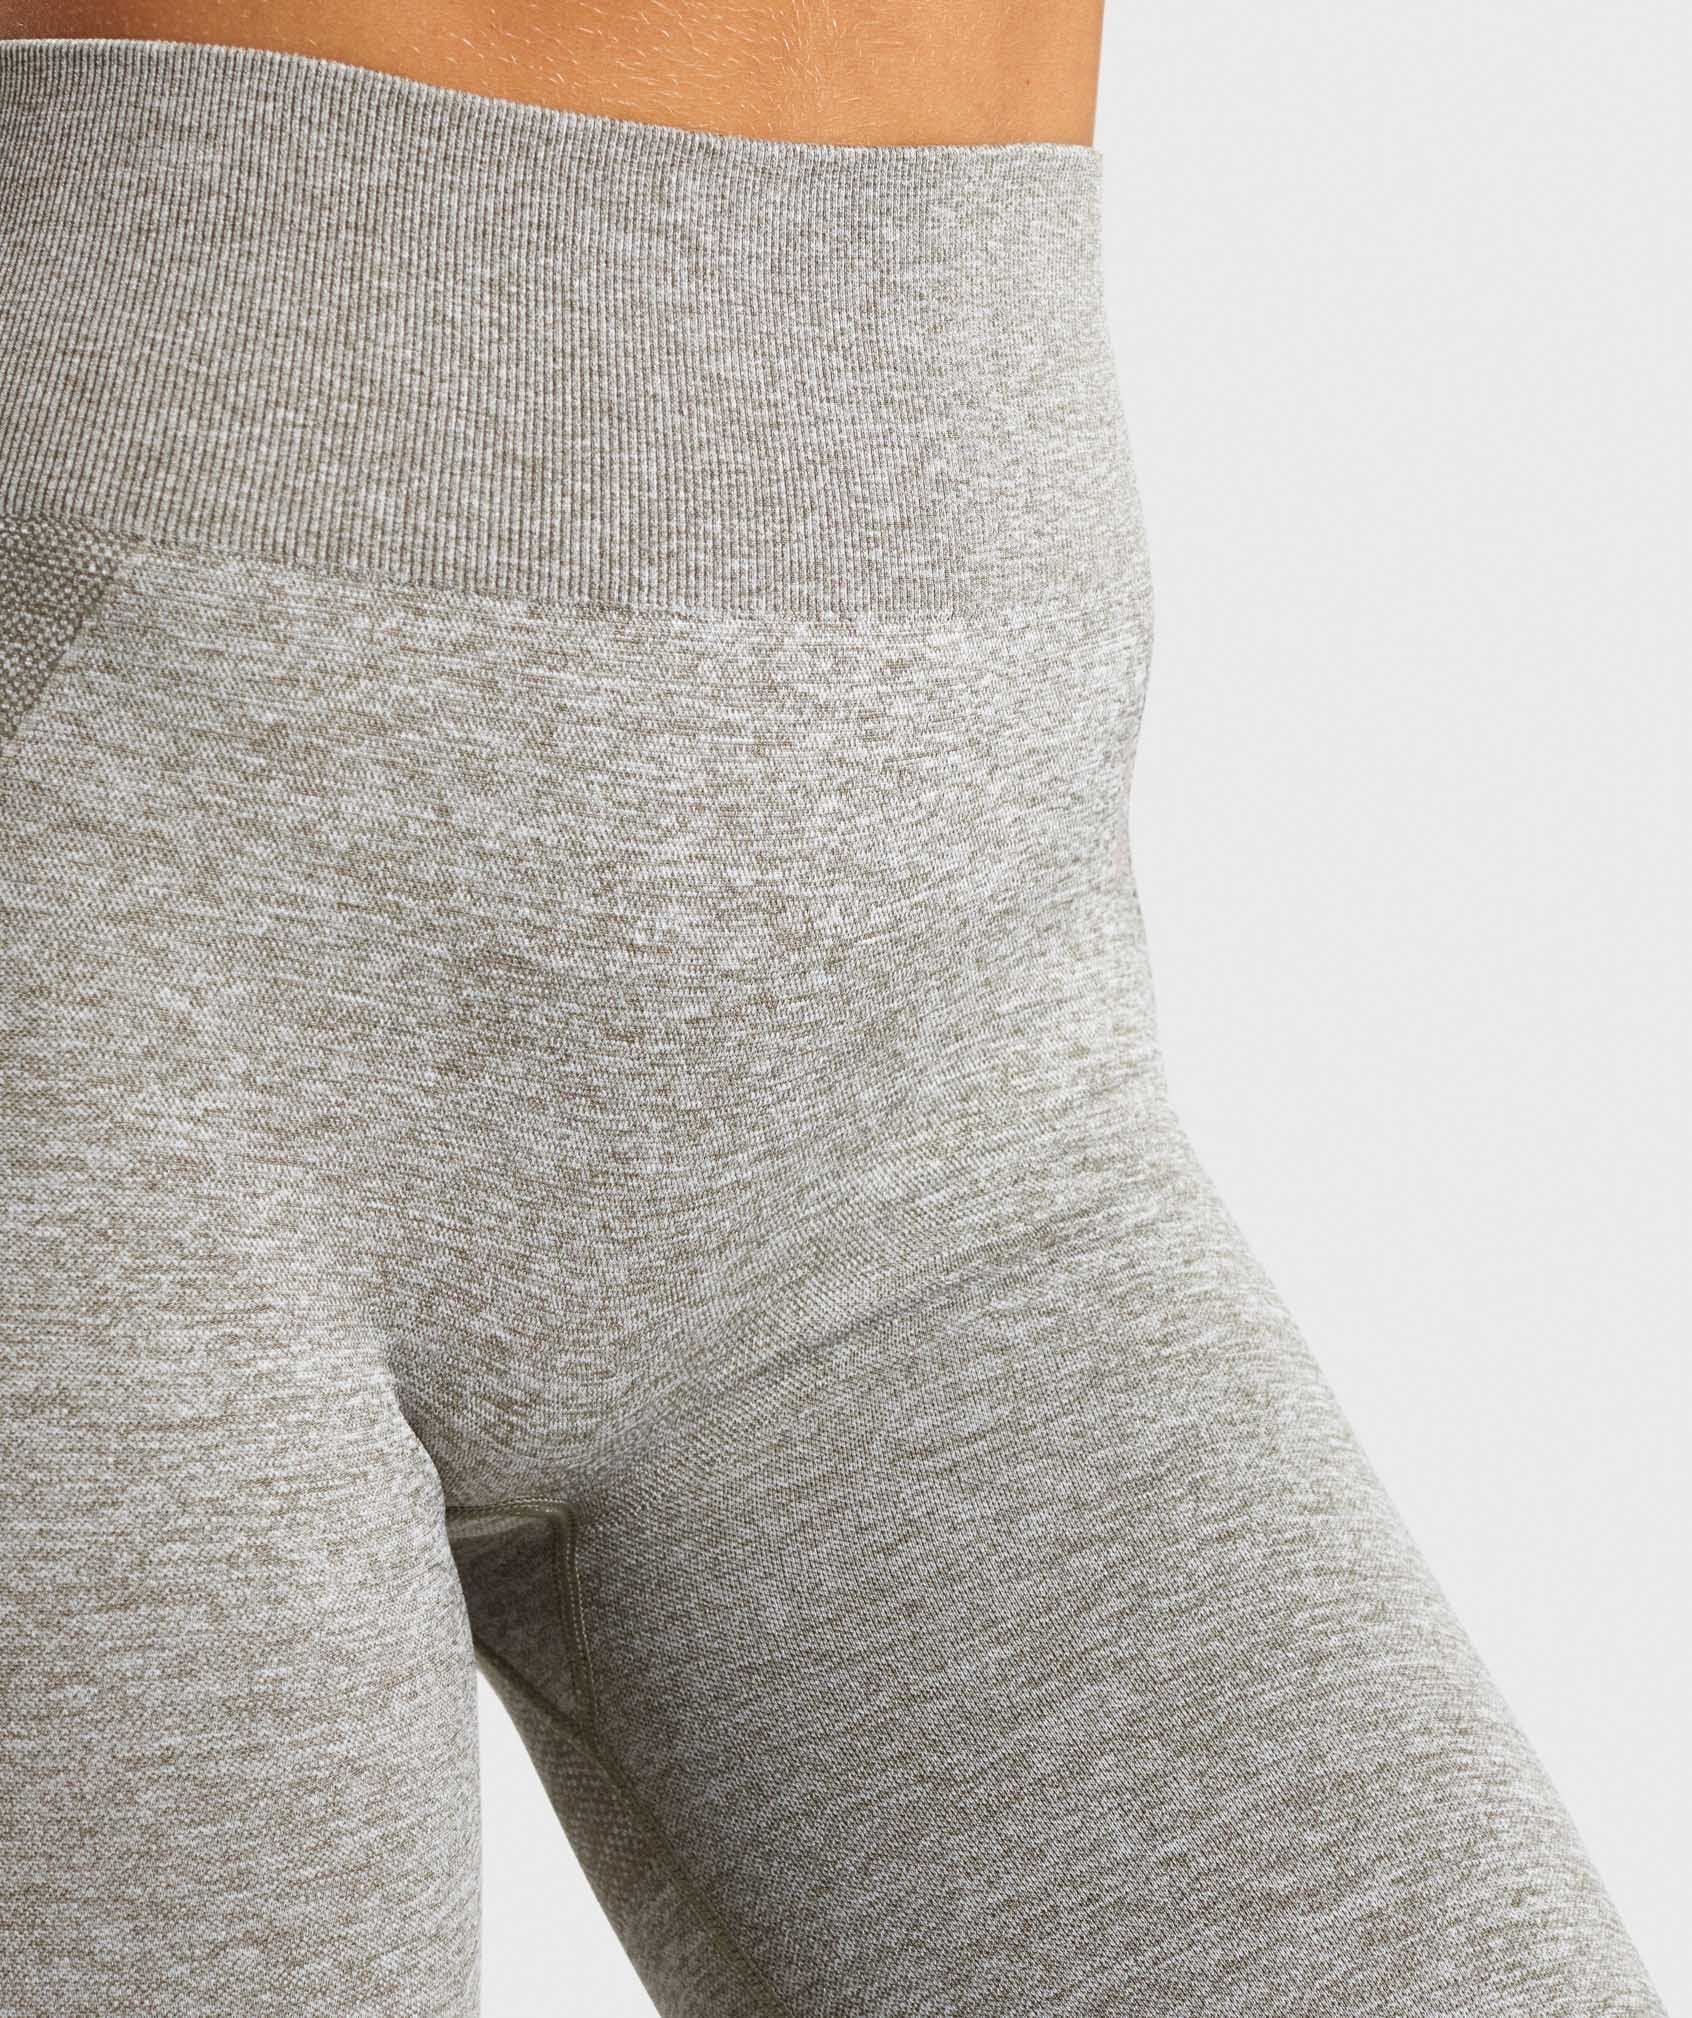 Flex Cycling Shorts in Khaki Marl/Taupe - view 6